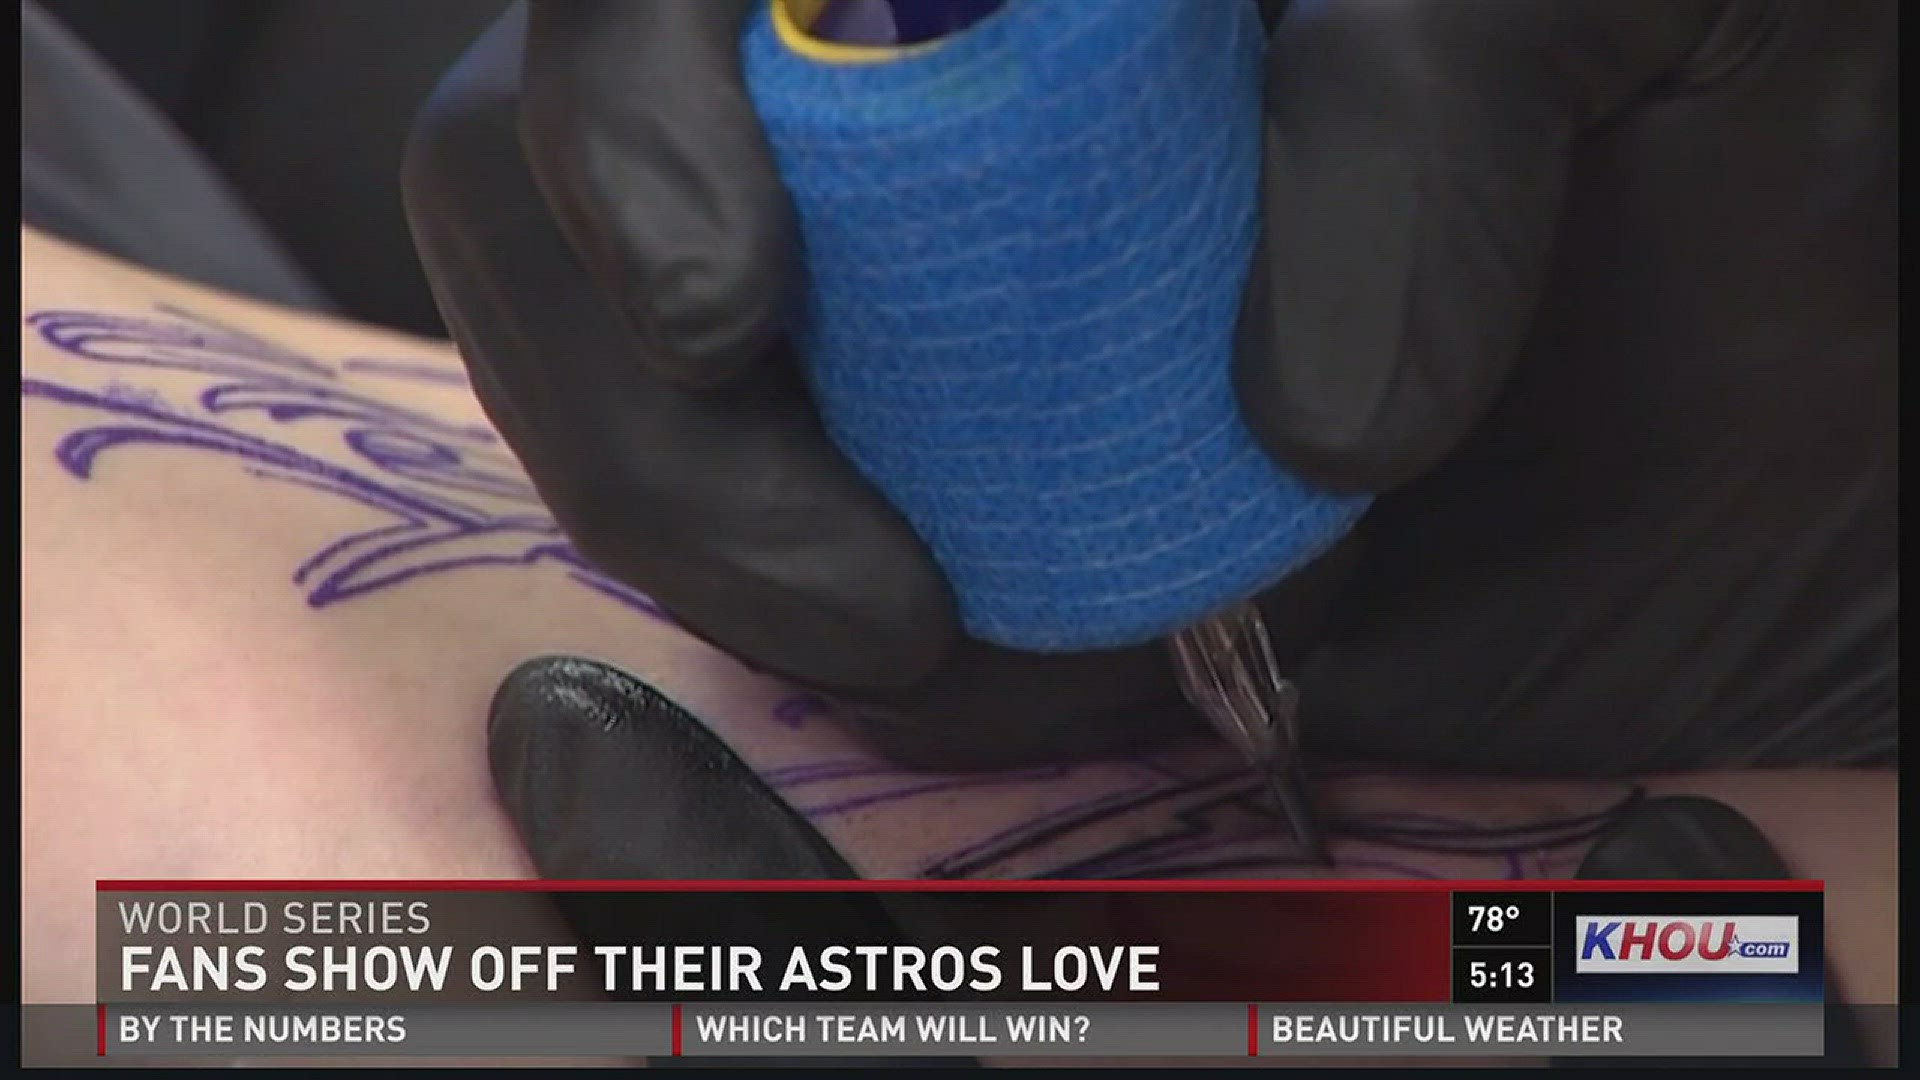 Astros fans are turning to more than swag to show their spirit.